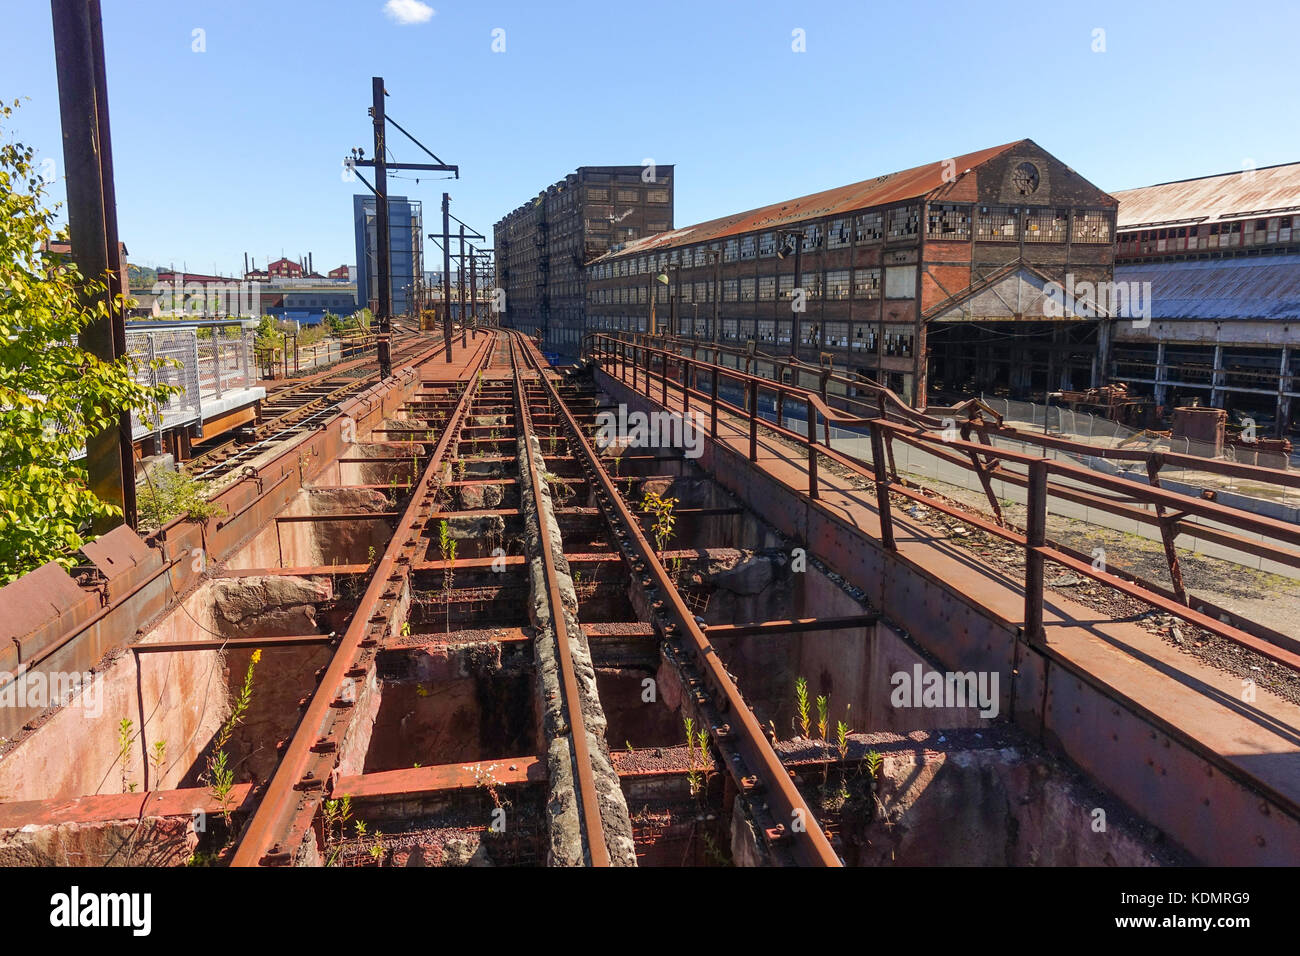 Bethlehem Steel Plant factory, Steelstacks, Pennsylvania,, Abandoned rusting remains of blast furnaces closed 1995, arts and events centre, USA. Stock Photo